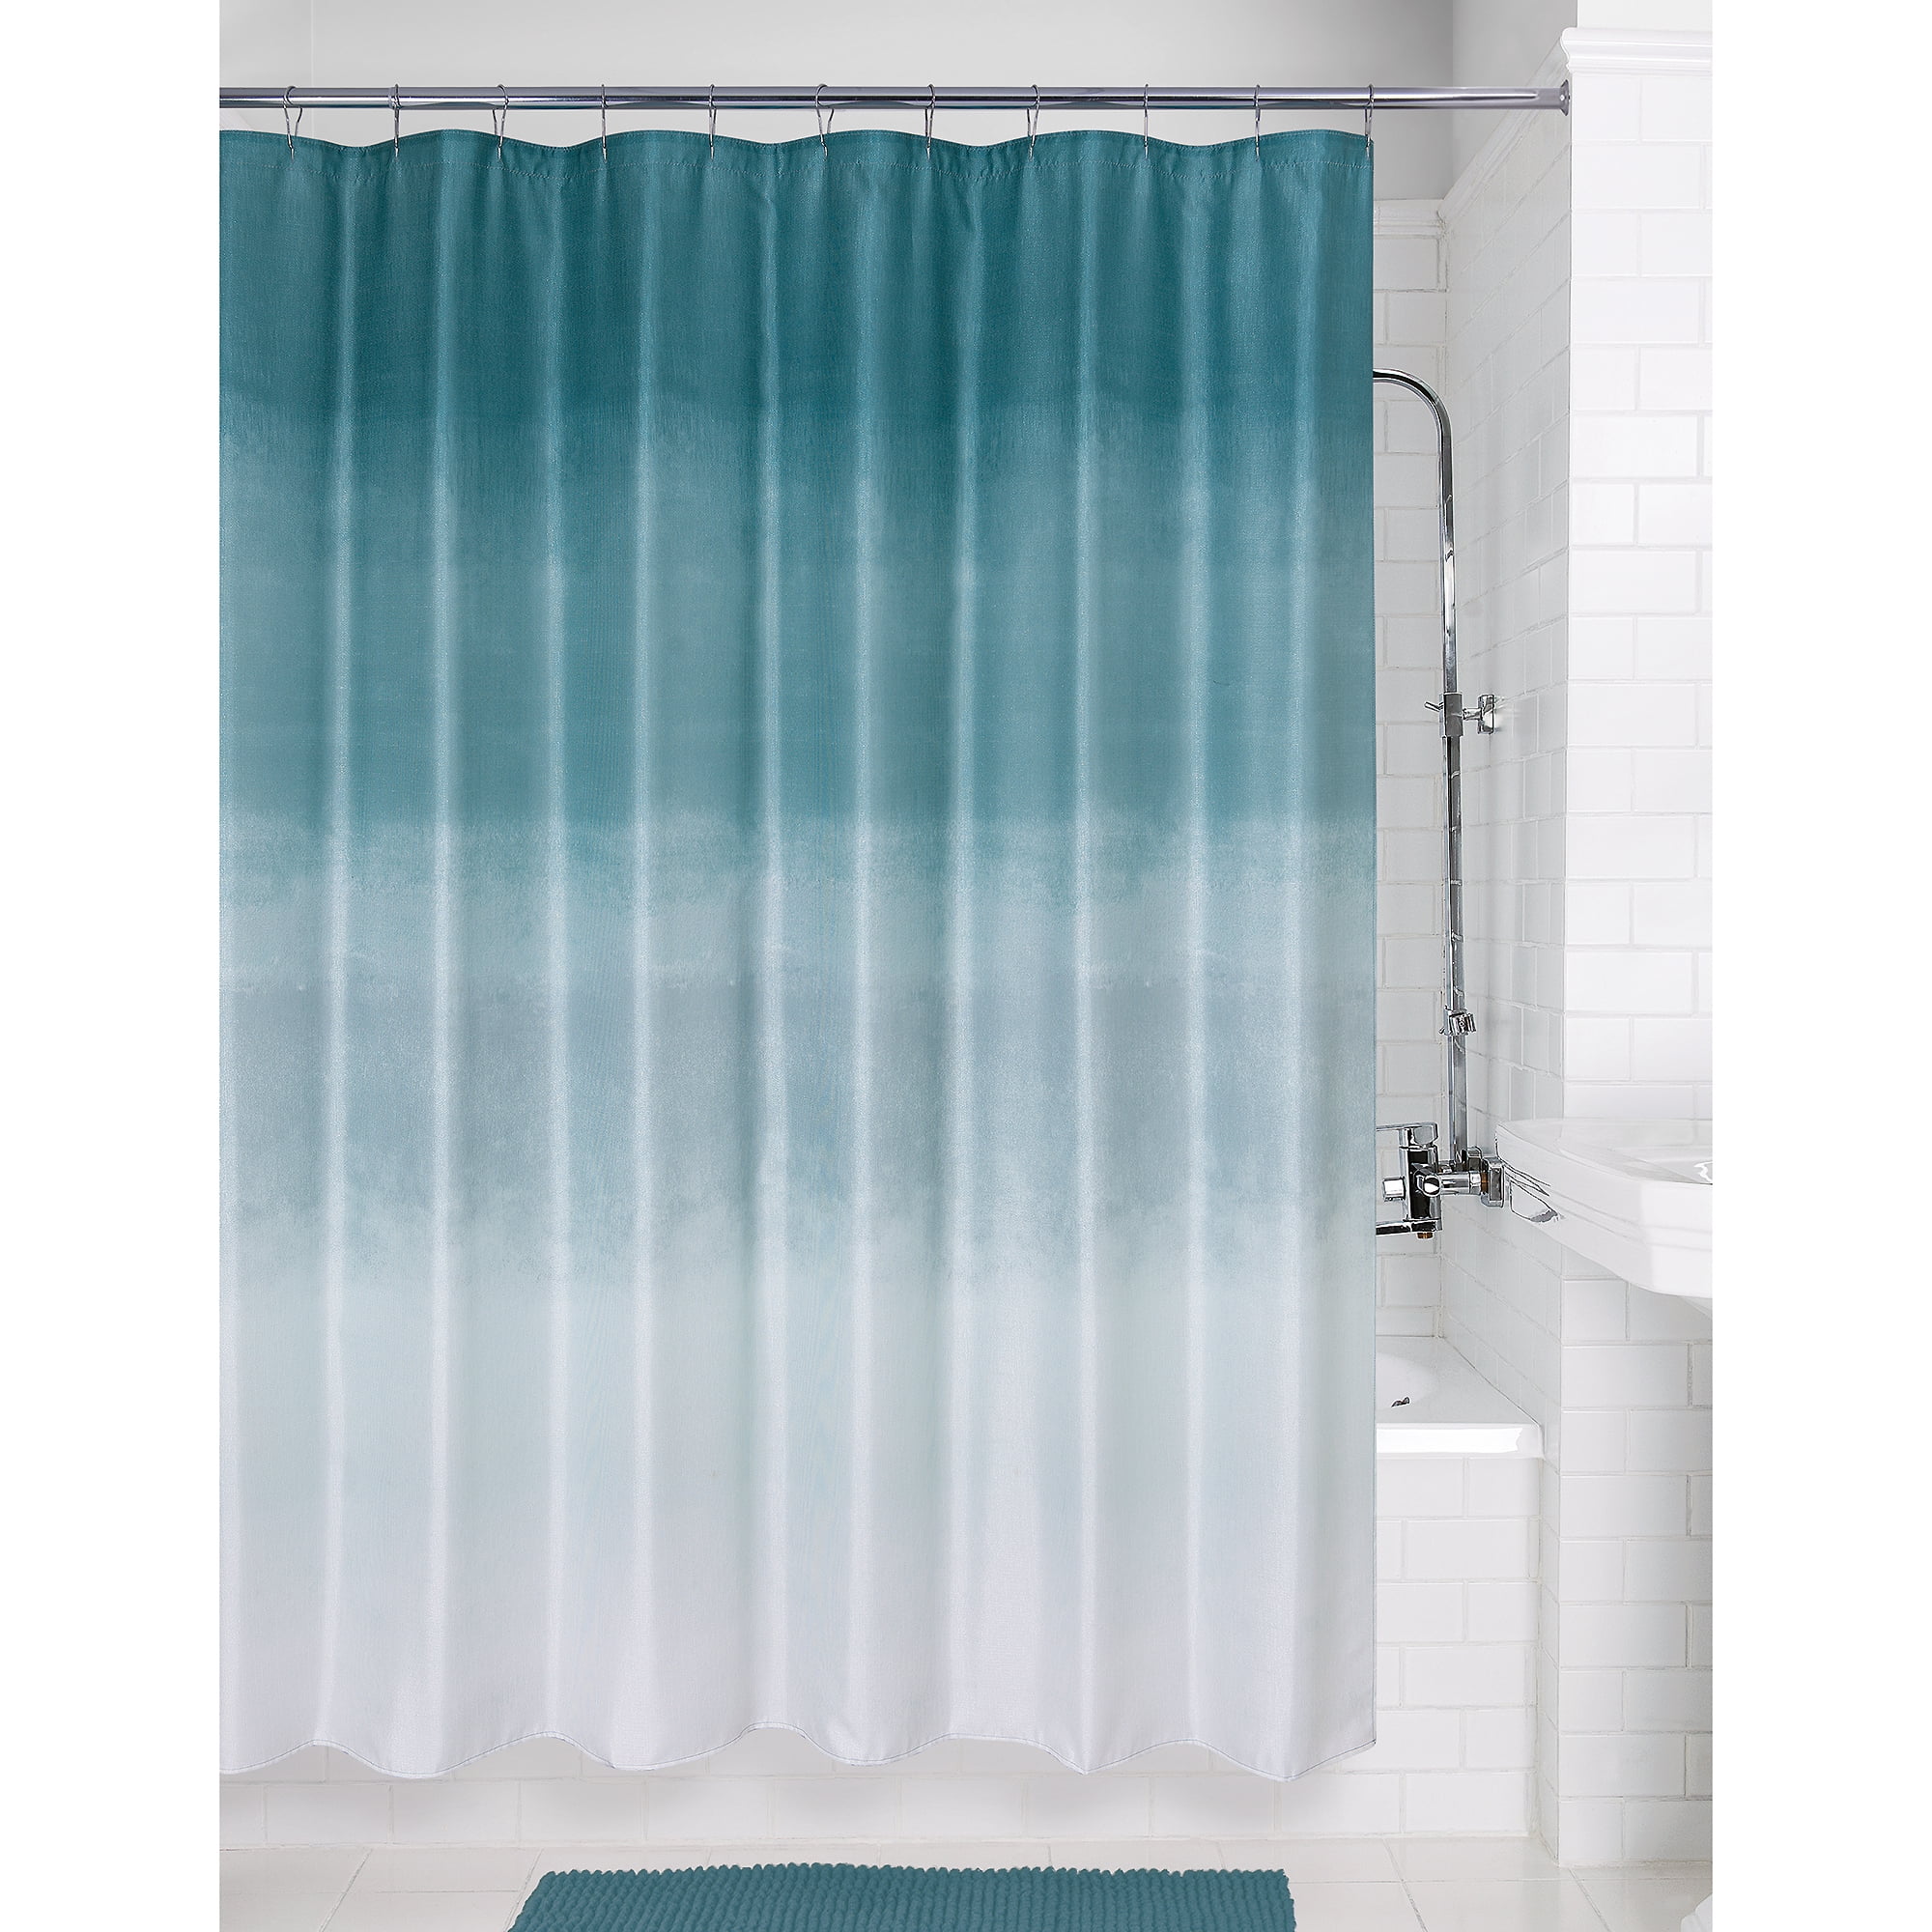 Metallic Ombre Glimmer Teal Polyester, Dark Blue And Teal Shower Curtain